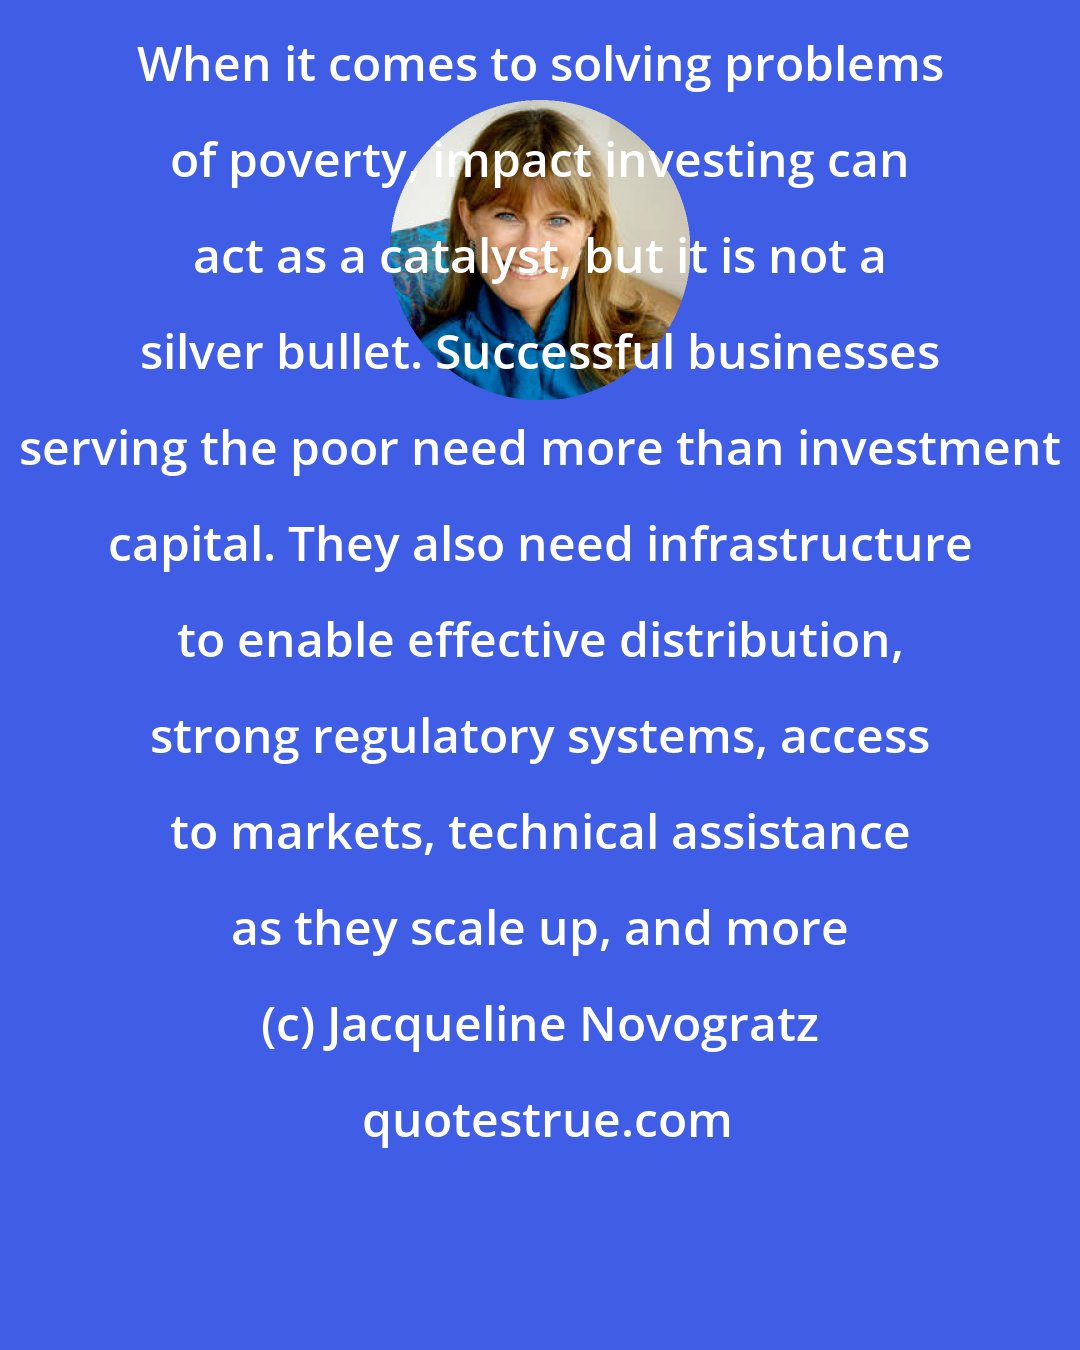 Jacqueline Novogratz: When it comes to solving problems of poverty, impact investing can act as a catalyst, but it is not a silver bullet. Successful businesses serving the poor need more than investment capital. They also need infrastructure to enable effective distribution, strong regulatory systems, access to markets, technical assistance as they scale up, and more